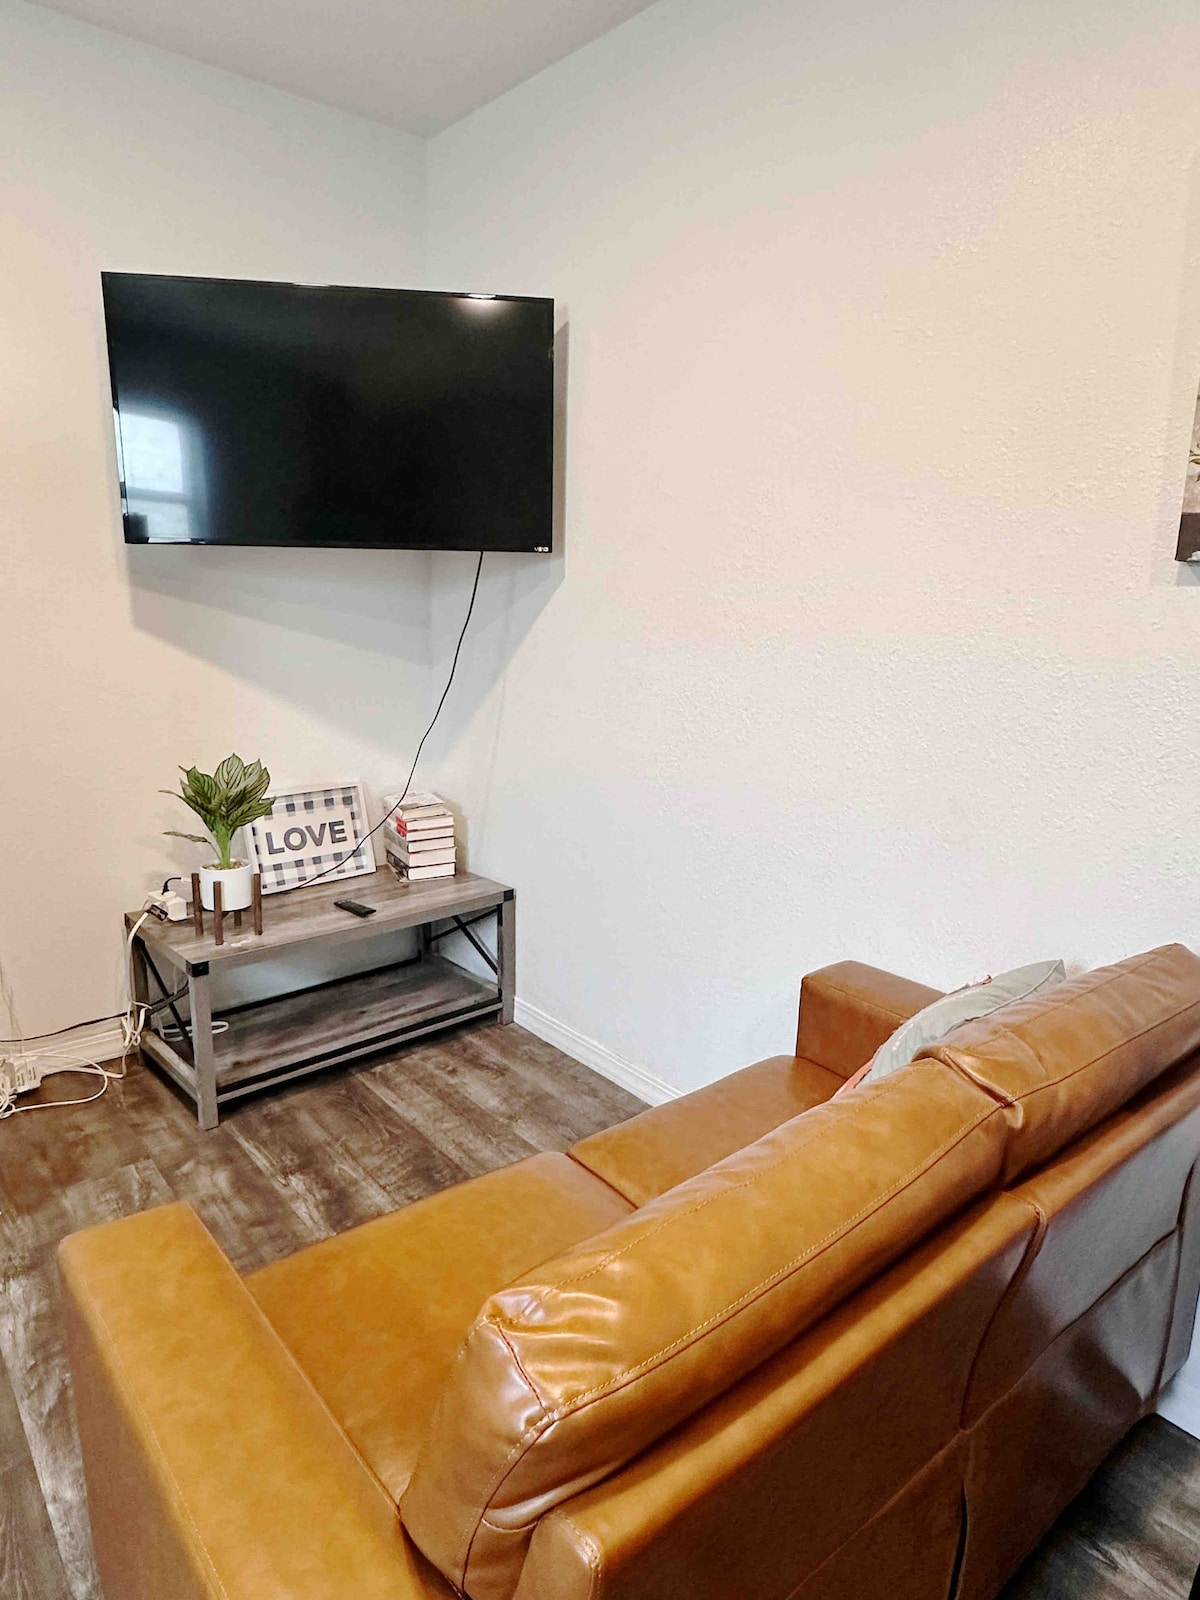 2BR Newly Remodeled Apartment 3min to Ft. Bliss